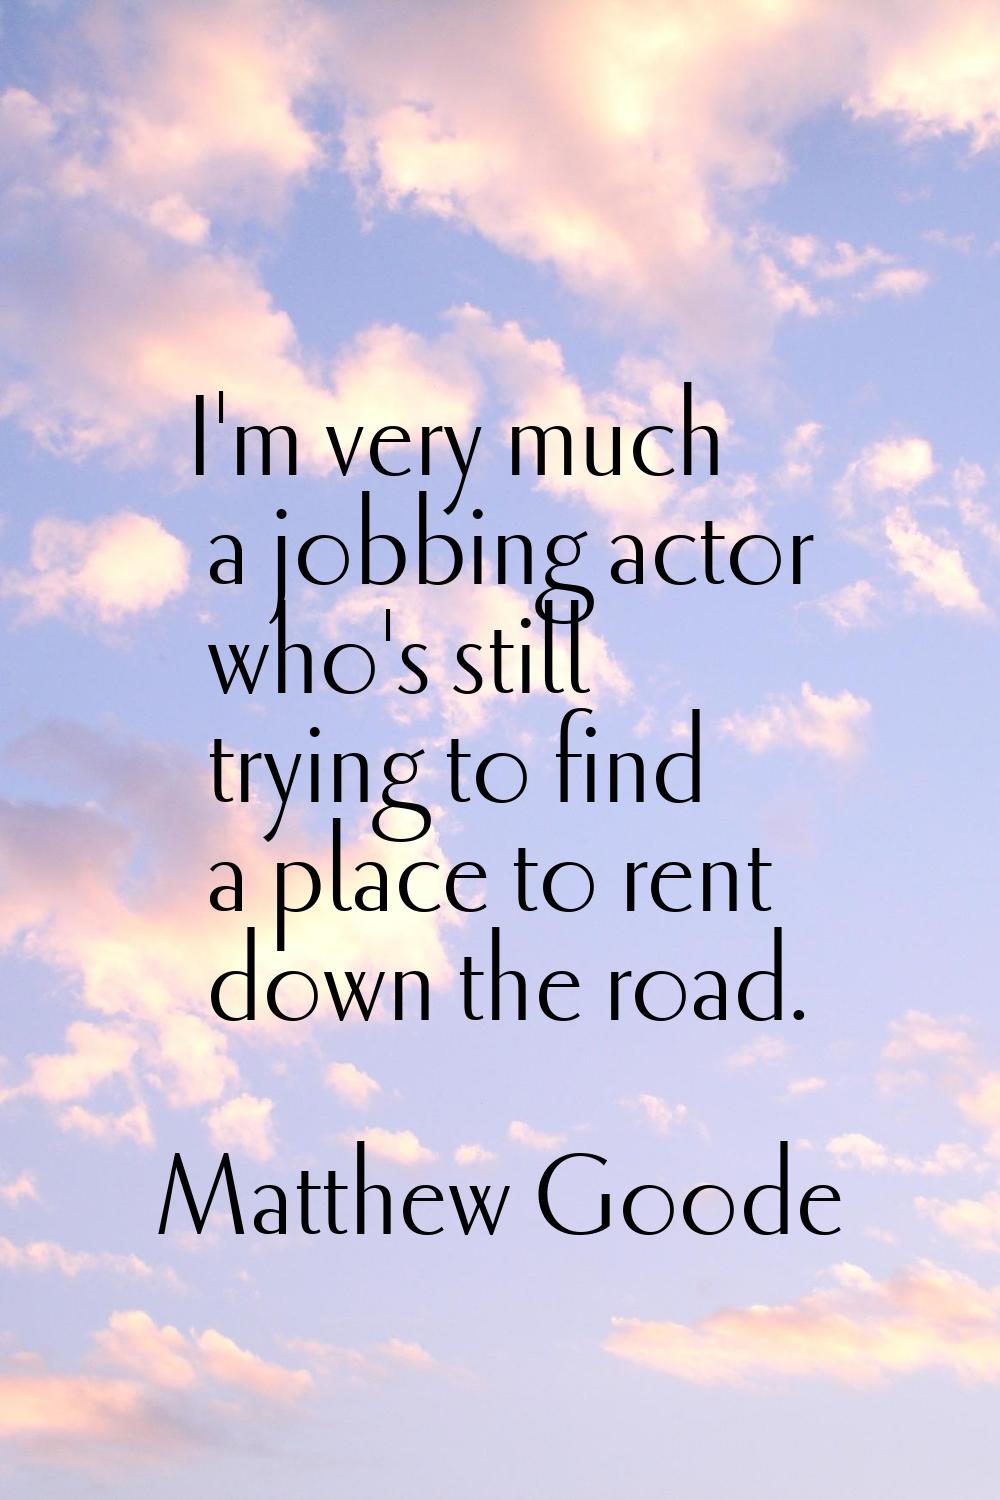 I'm very much a jobbing actor who's still trying to find a place to rent down the road.